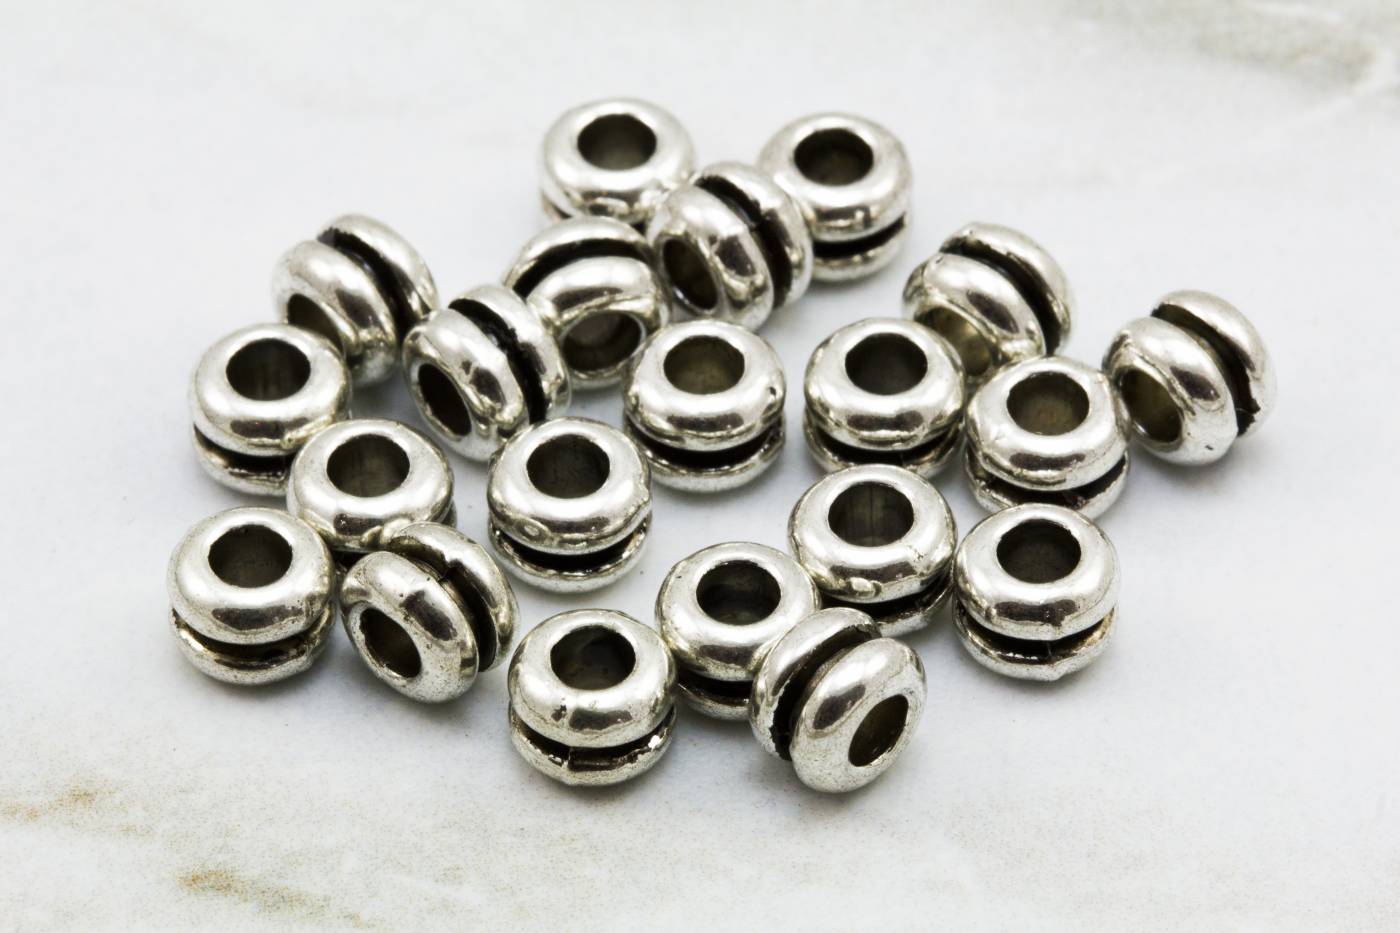 metal-silver-round-jewelry-spacer-beads